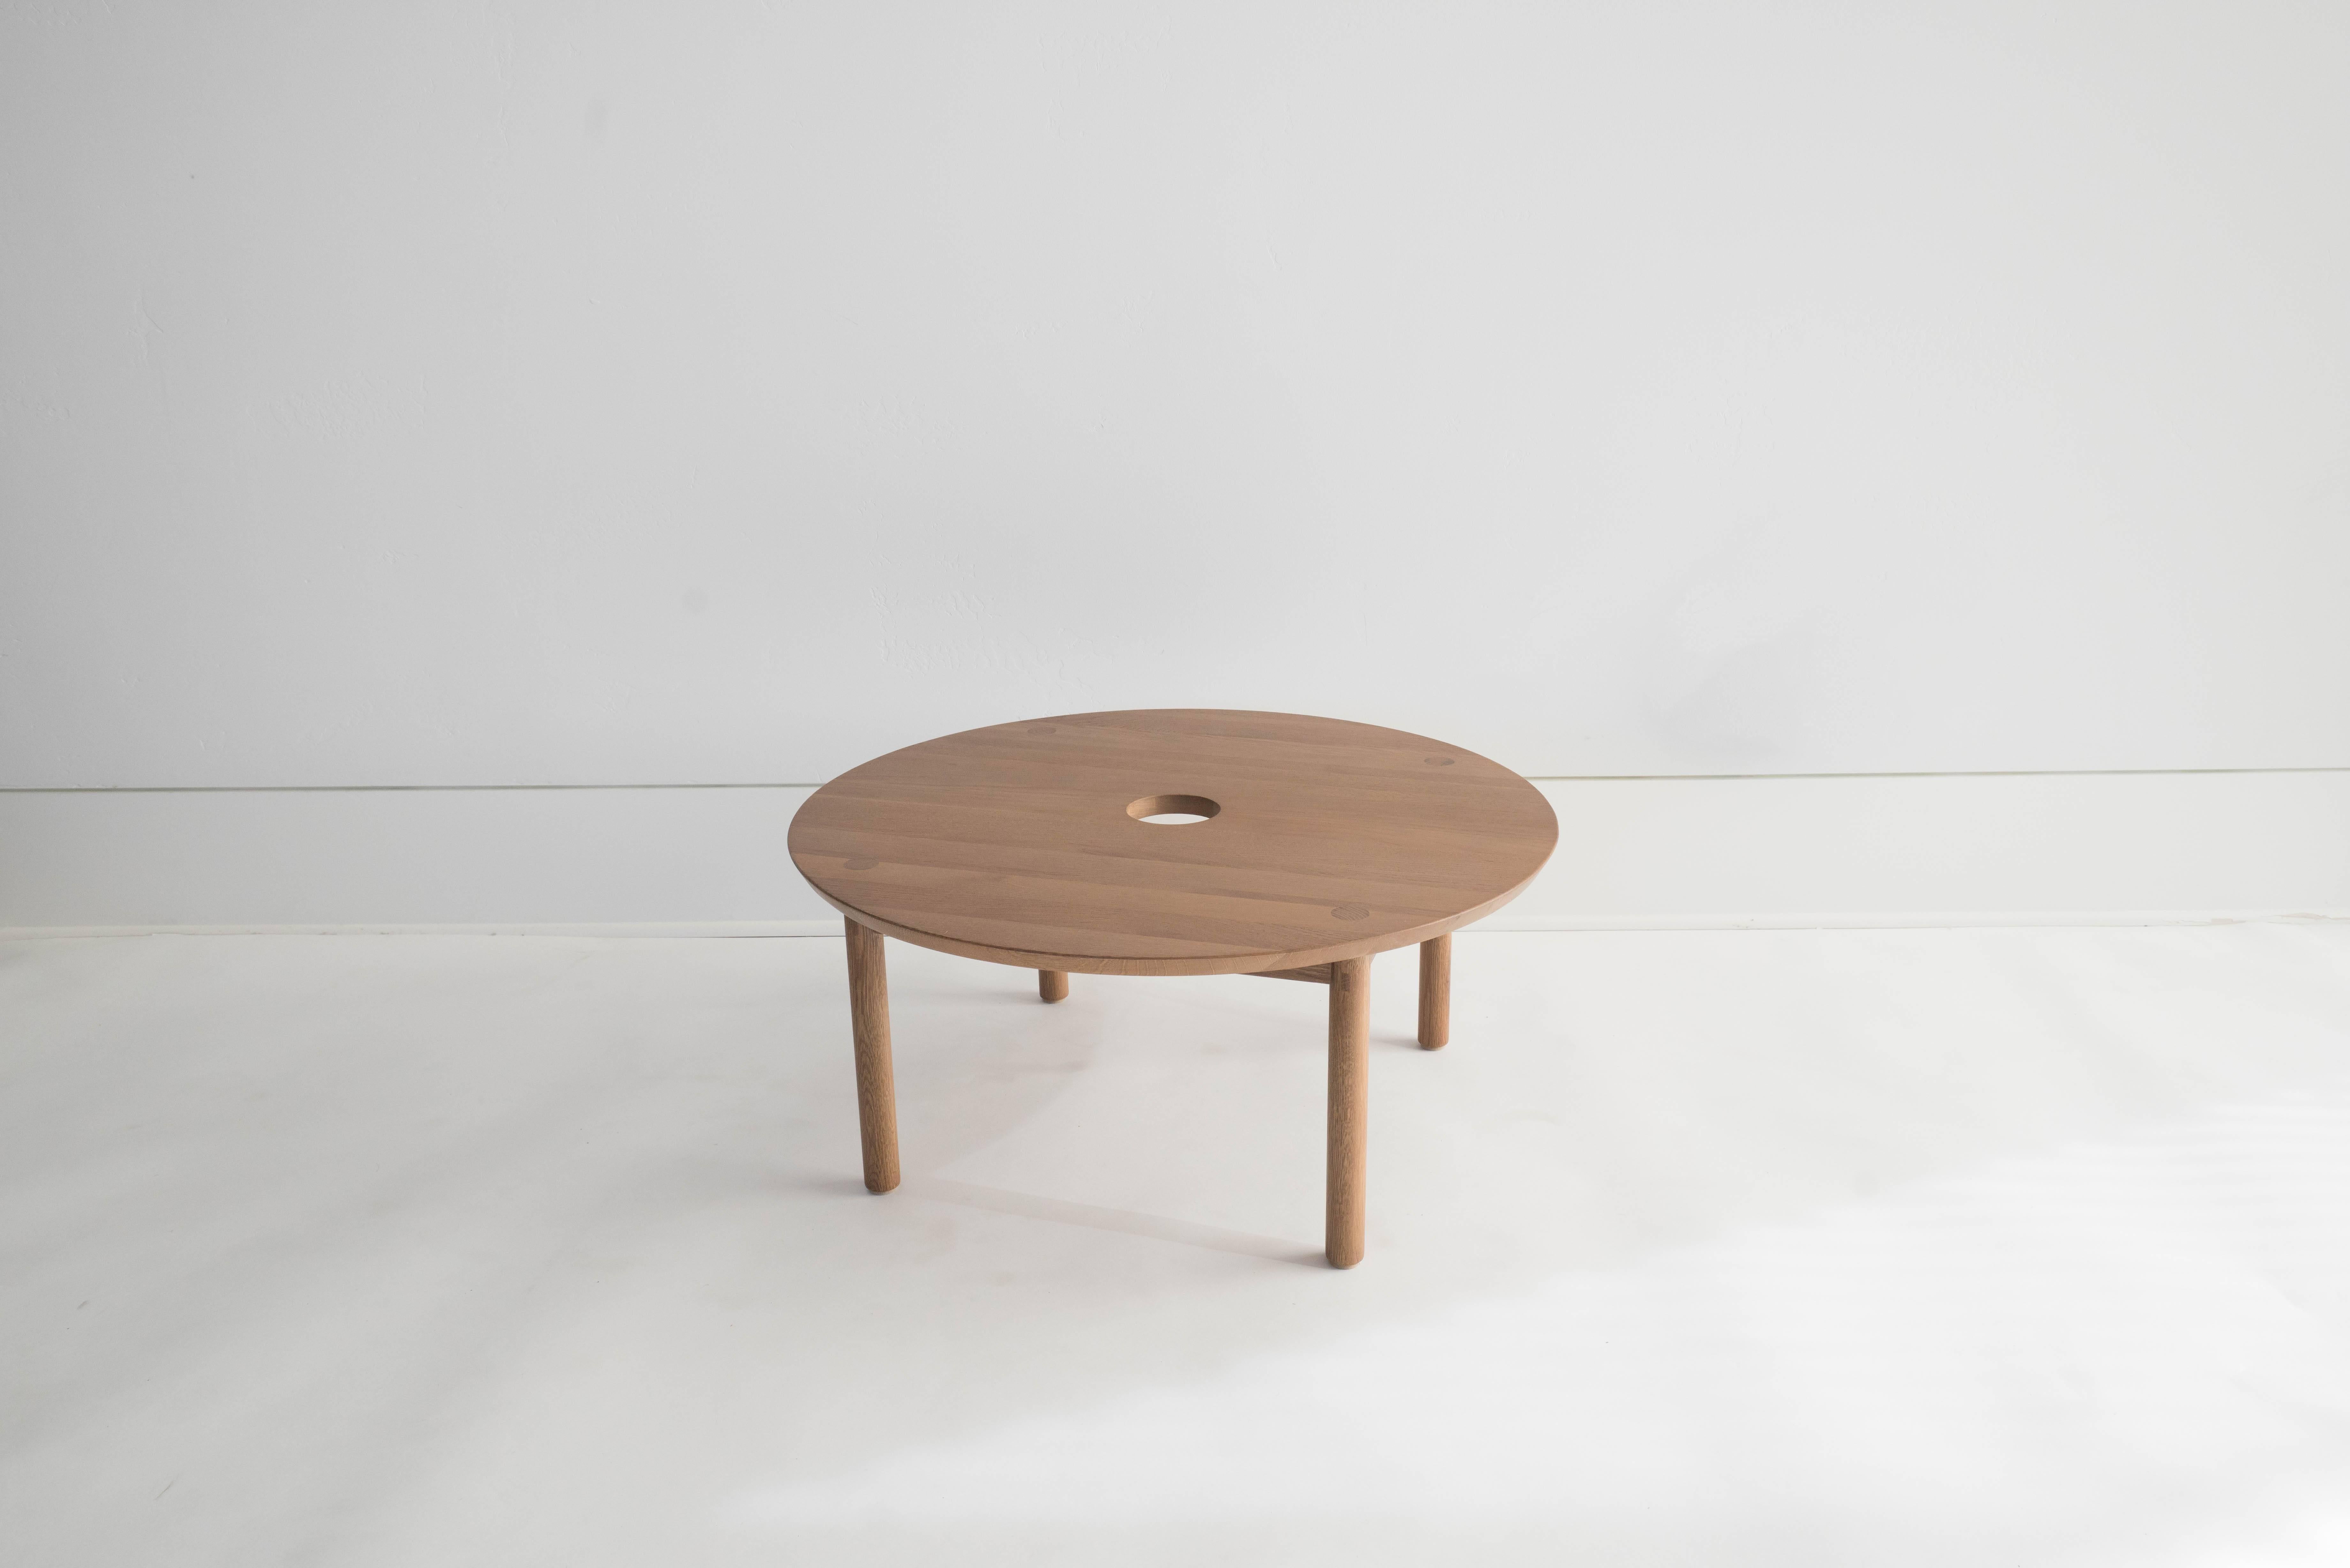 Sun at Six is a contemporary furniture design studio that works with traditional Chinese joinery masters to handcraft our pieces using traditional joinery. Our classic round coffee table. We use exposed tenons throughout.

Great furniture begins